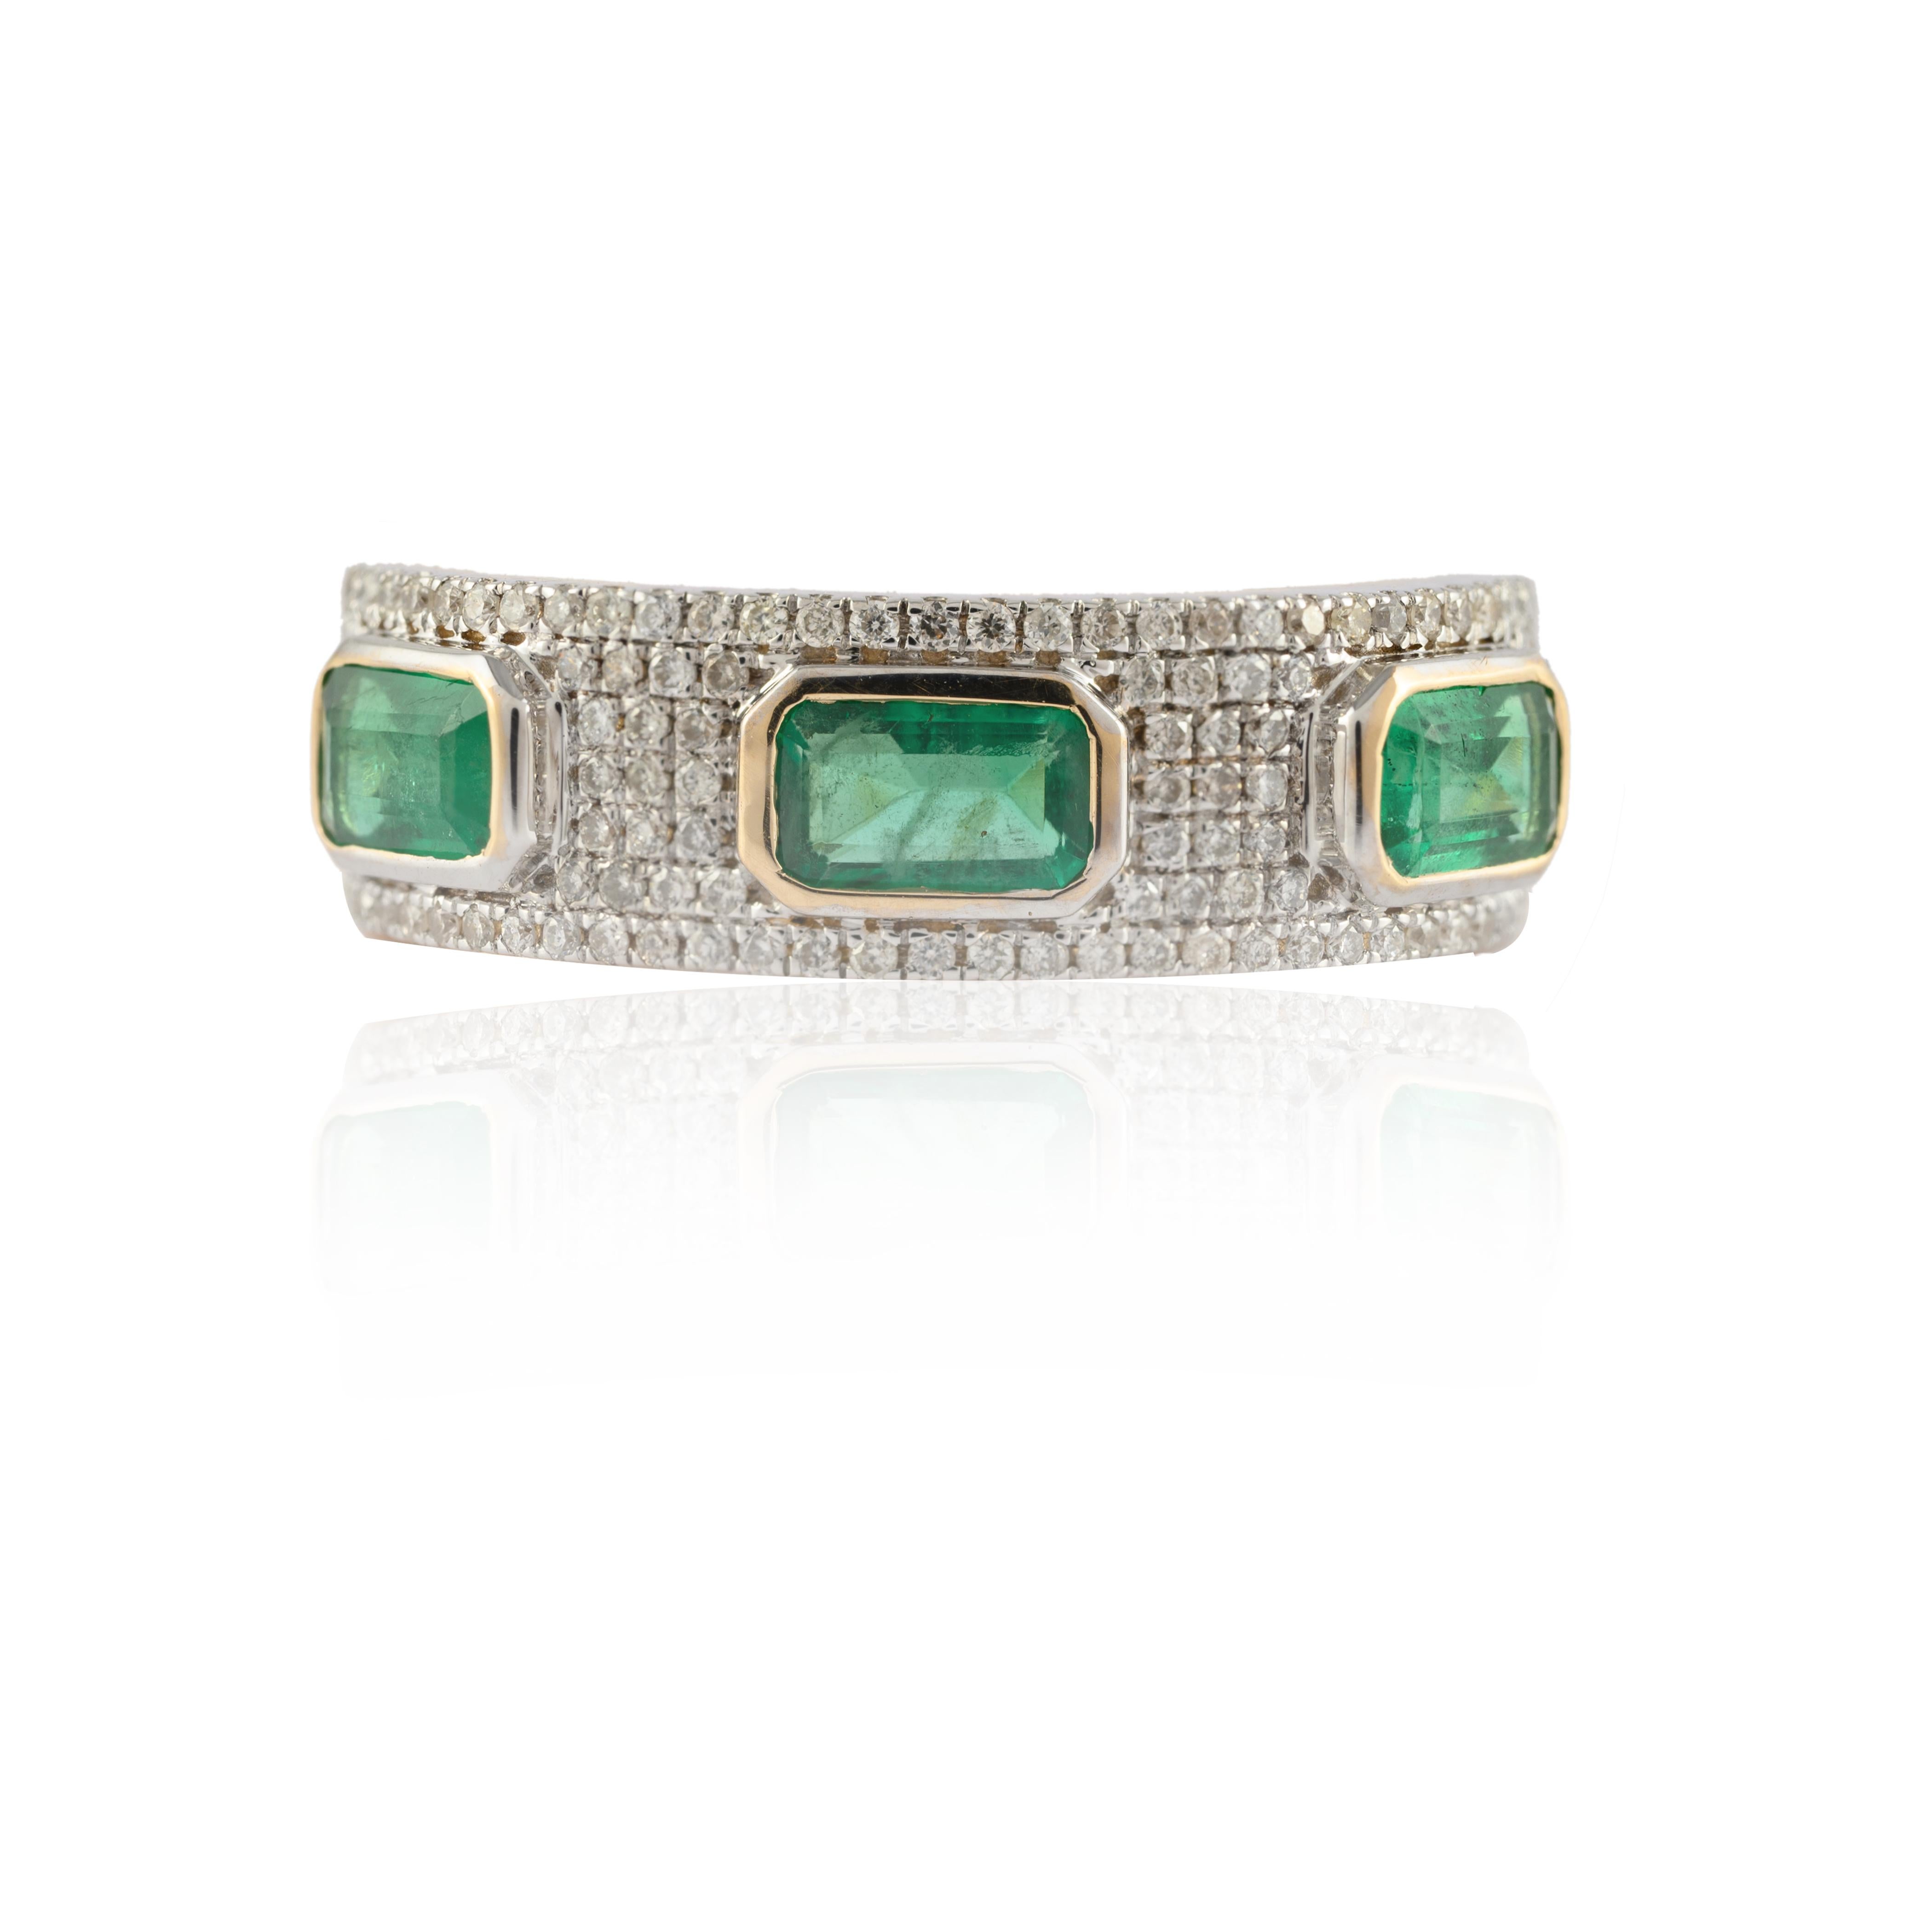 For Sale:  Impeccable 14k Yellow Gold Three Stone Emerald and Diamond Engagement Ring 2